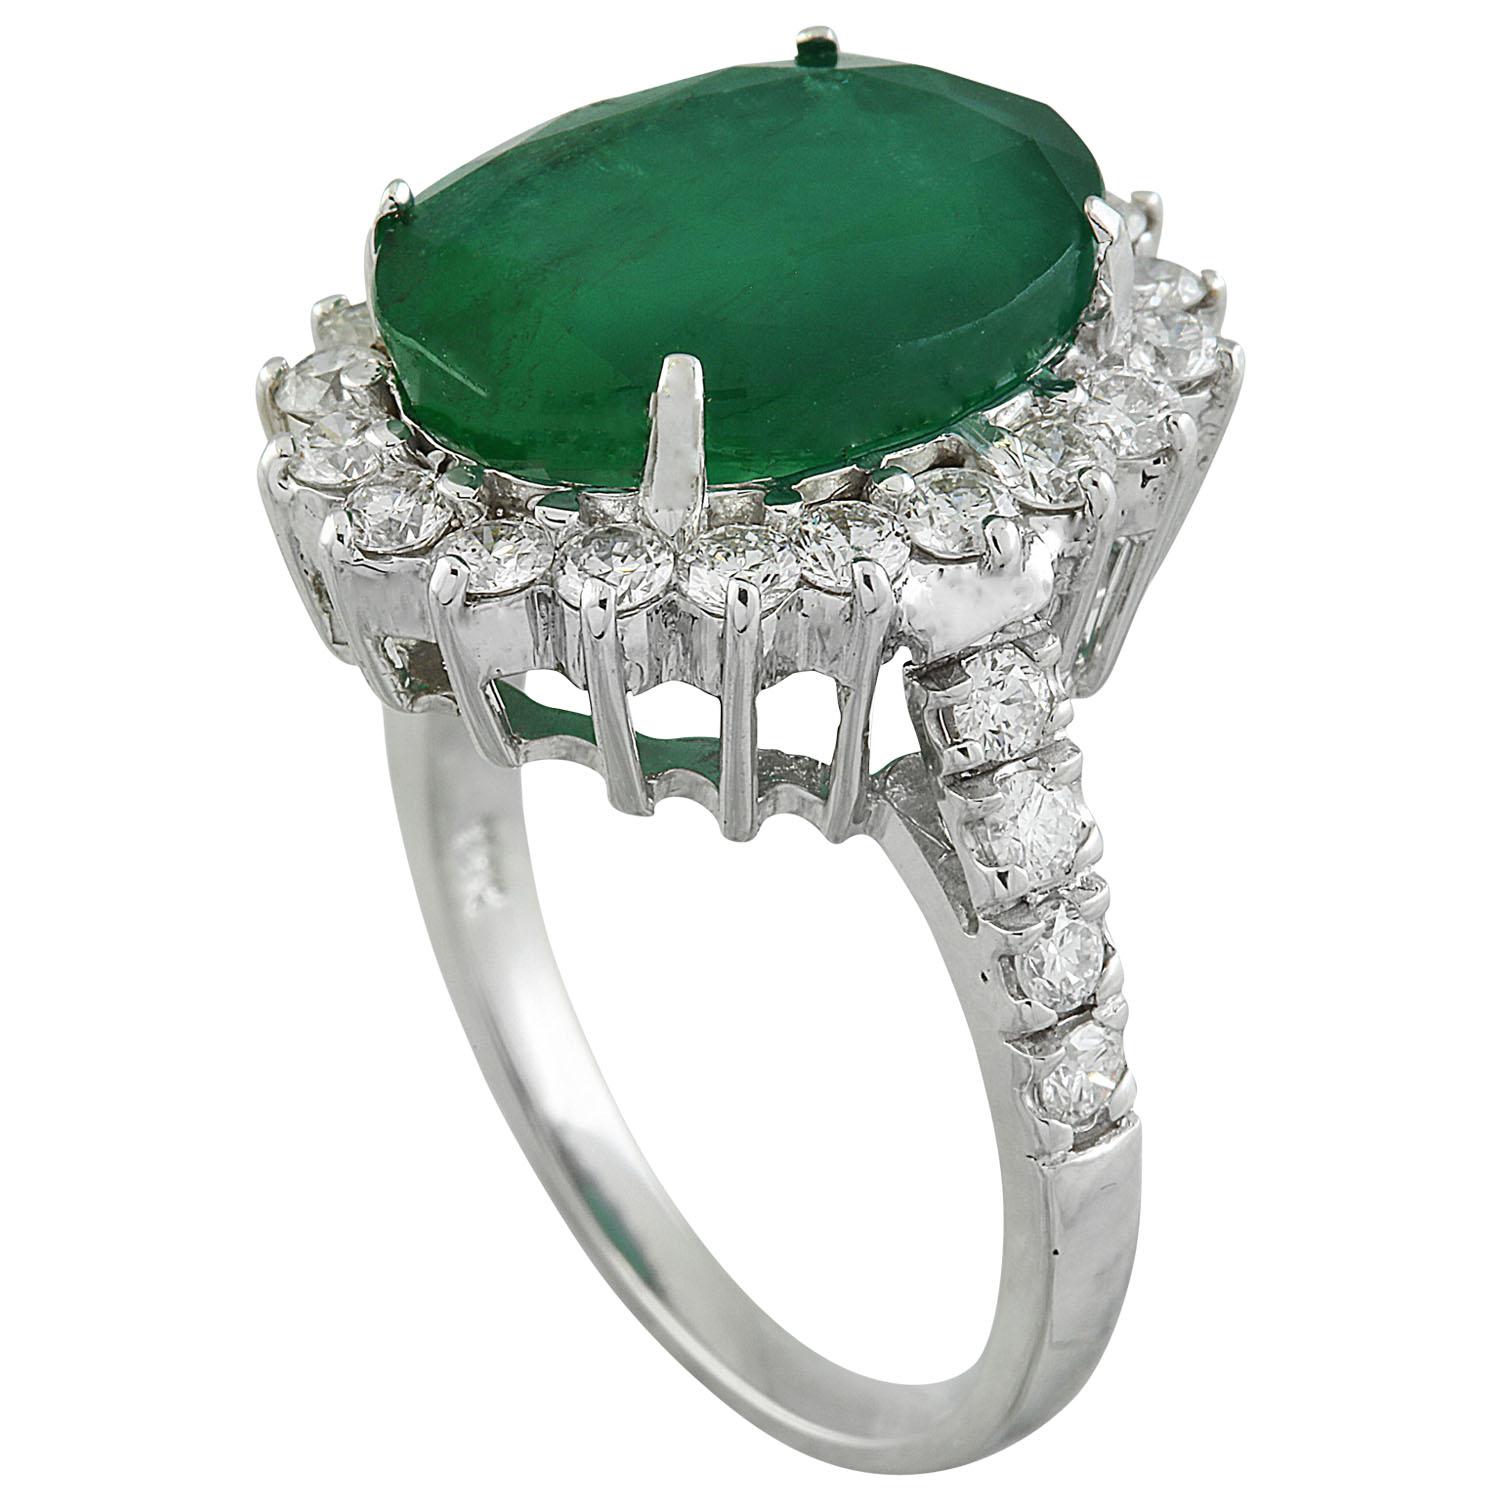 9.30 Carat Natural Emerald 14 Karat Solid White Gold Diamond Ring
Stamped: 14K 
Total Ring Weight: 7.2 Grams 
Emerald Weight 8.05 Carat (14.00x10.00 Millimeters)
Diamond Weight: 1.25 carat (F-G Color, VS2-SI1 Clarity)
Face Measures: 20.30x16.90